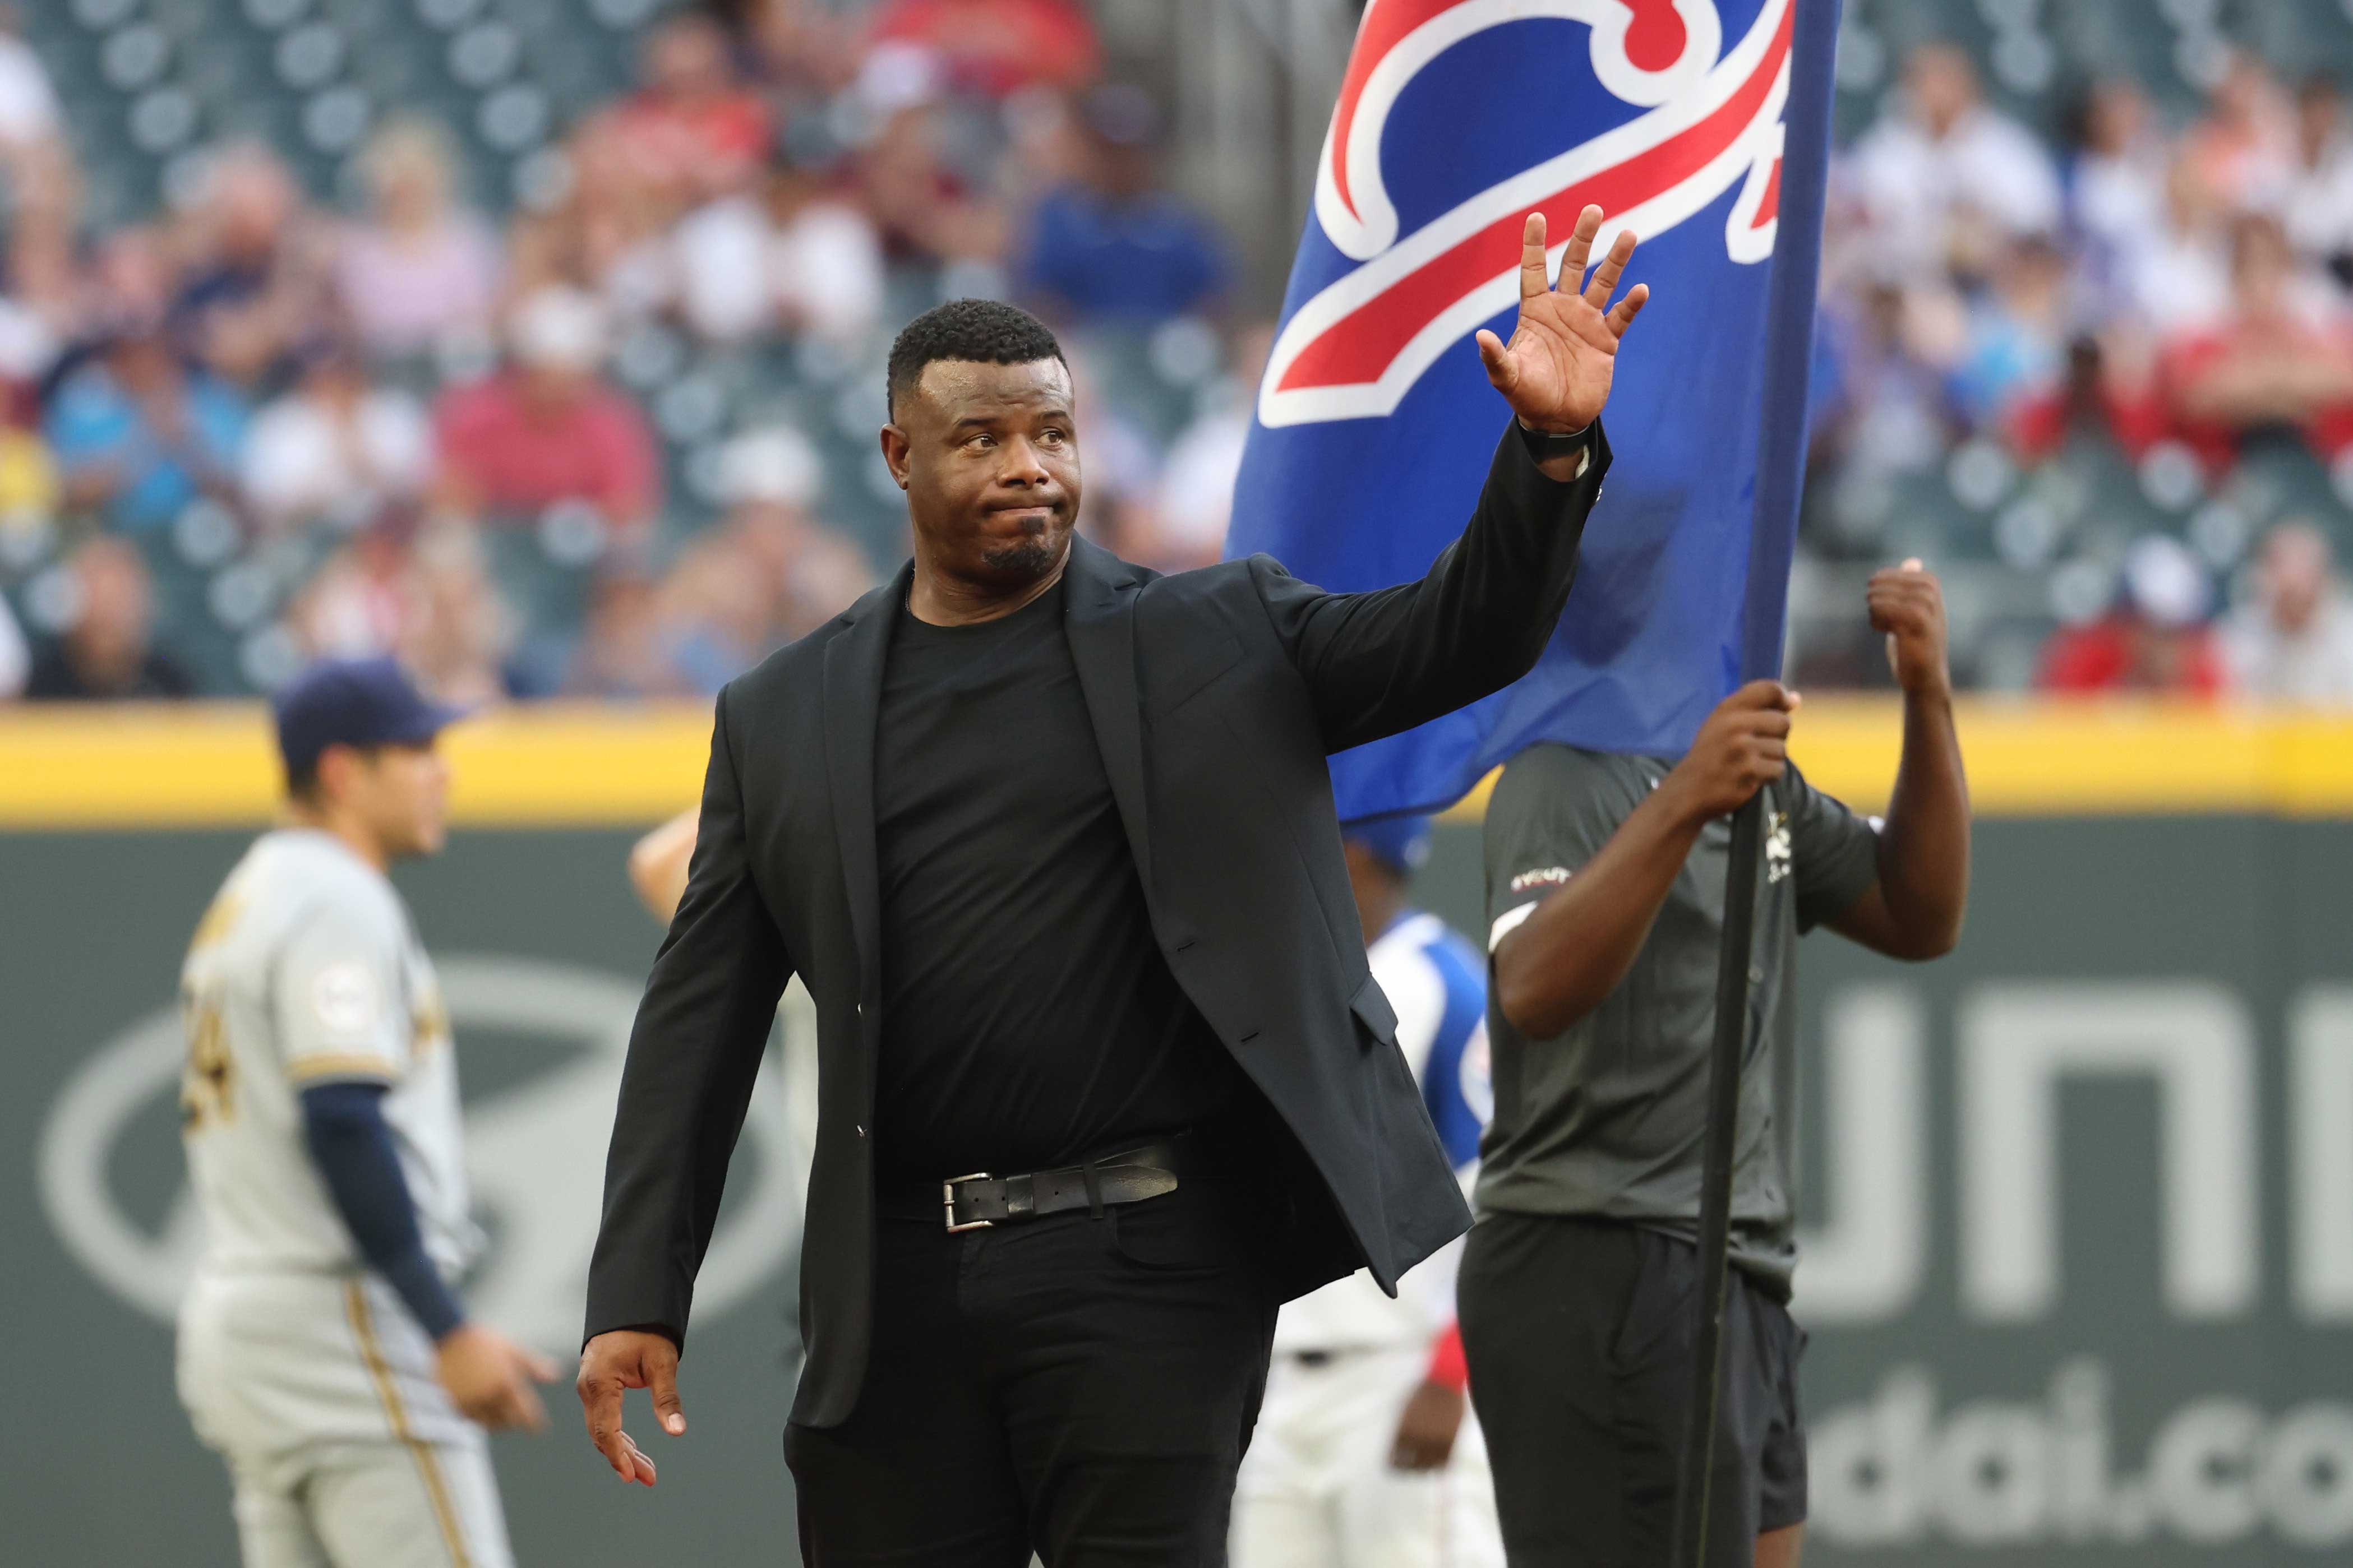 Hall of Famer Ken Griffey Jr. joins Mariners ownership group